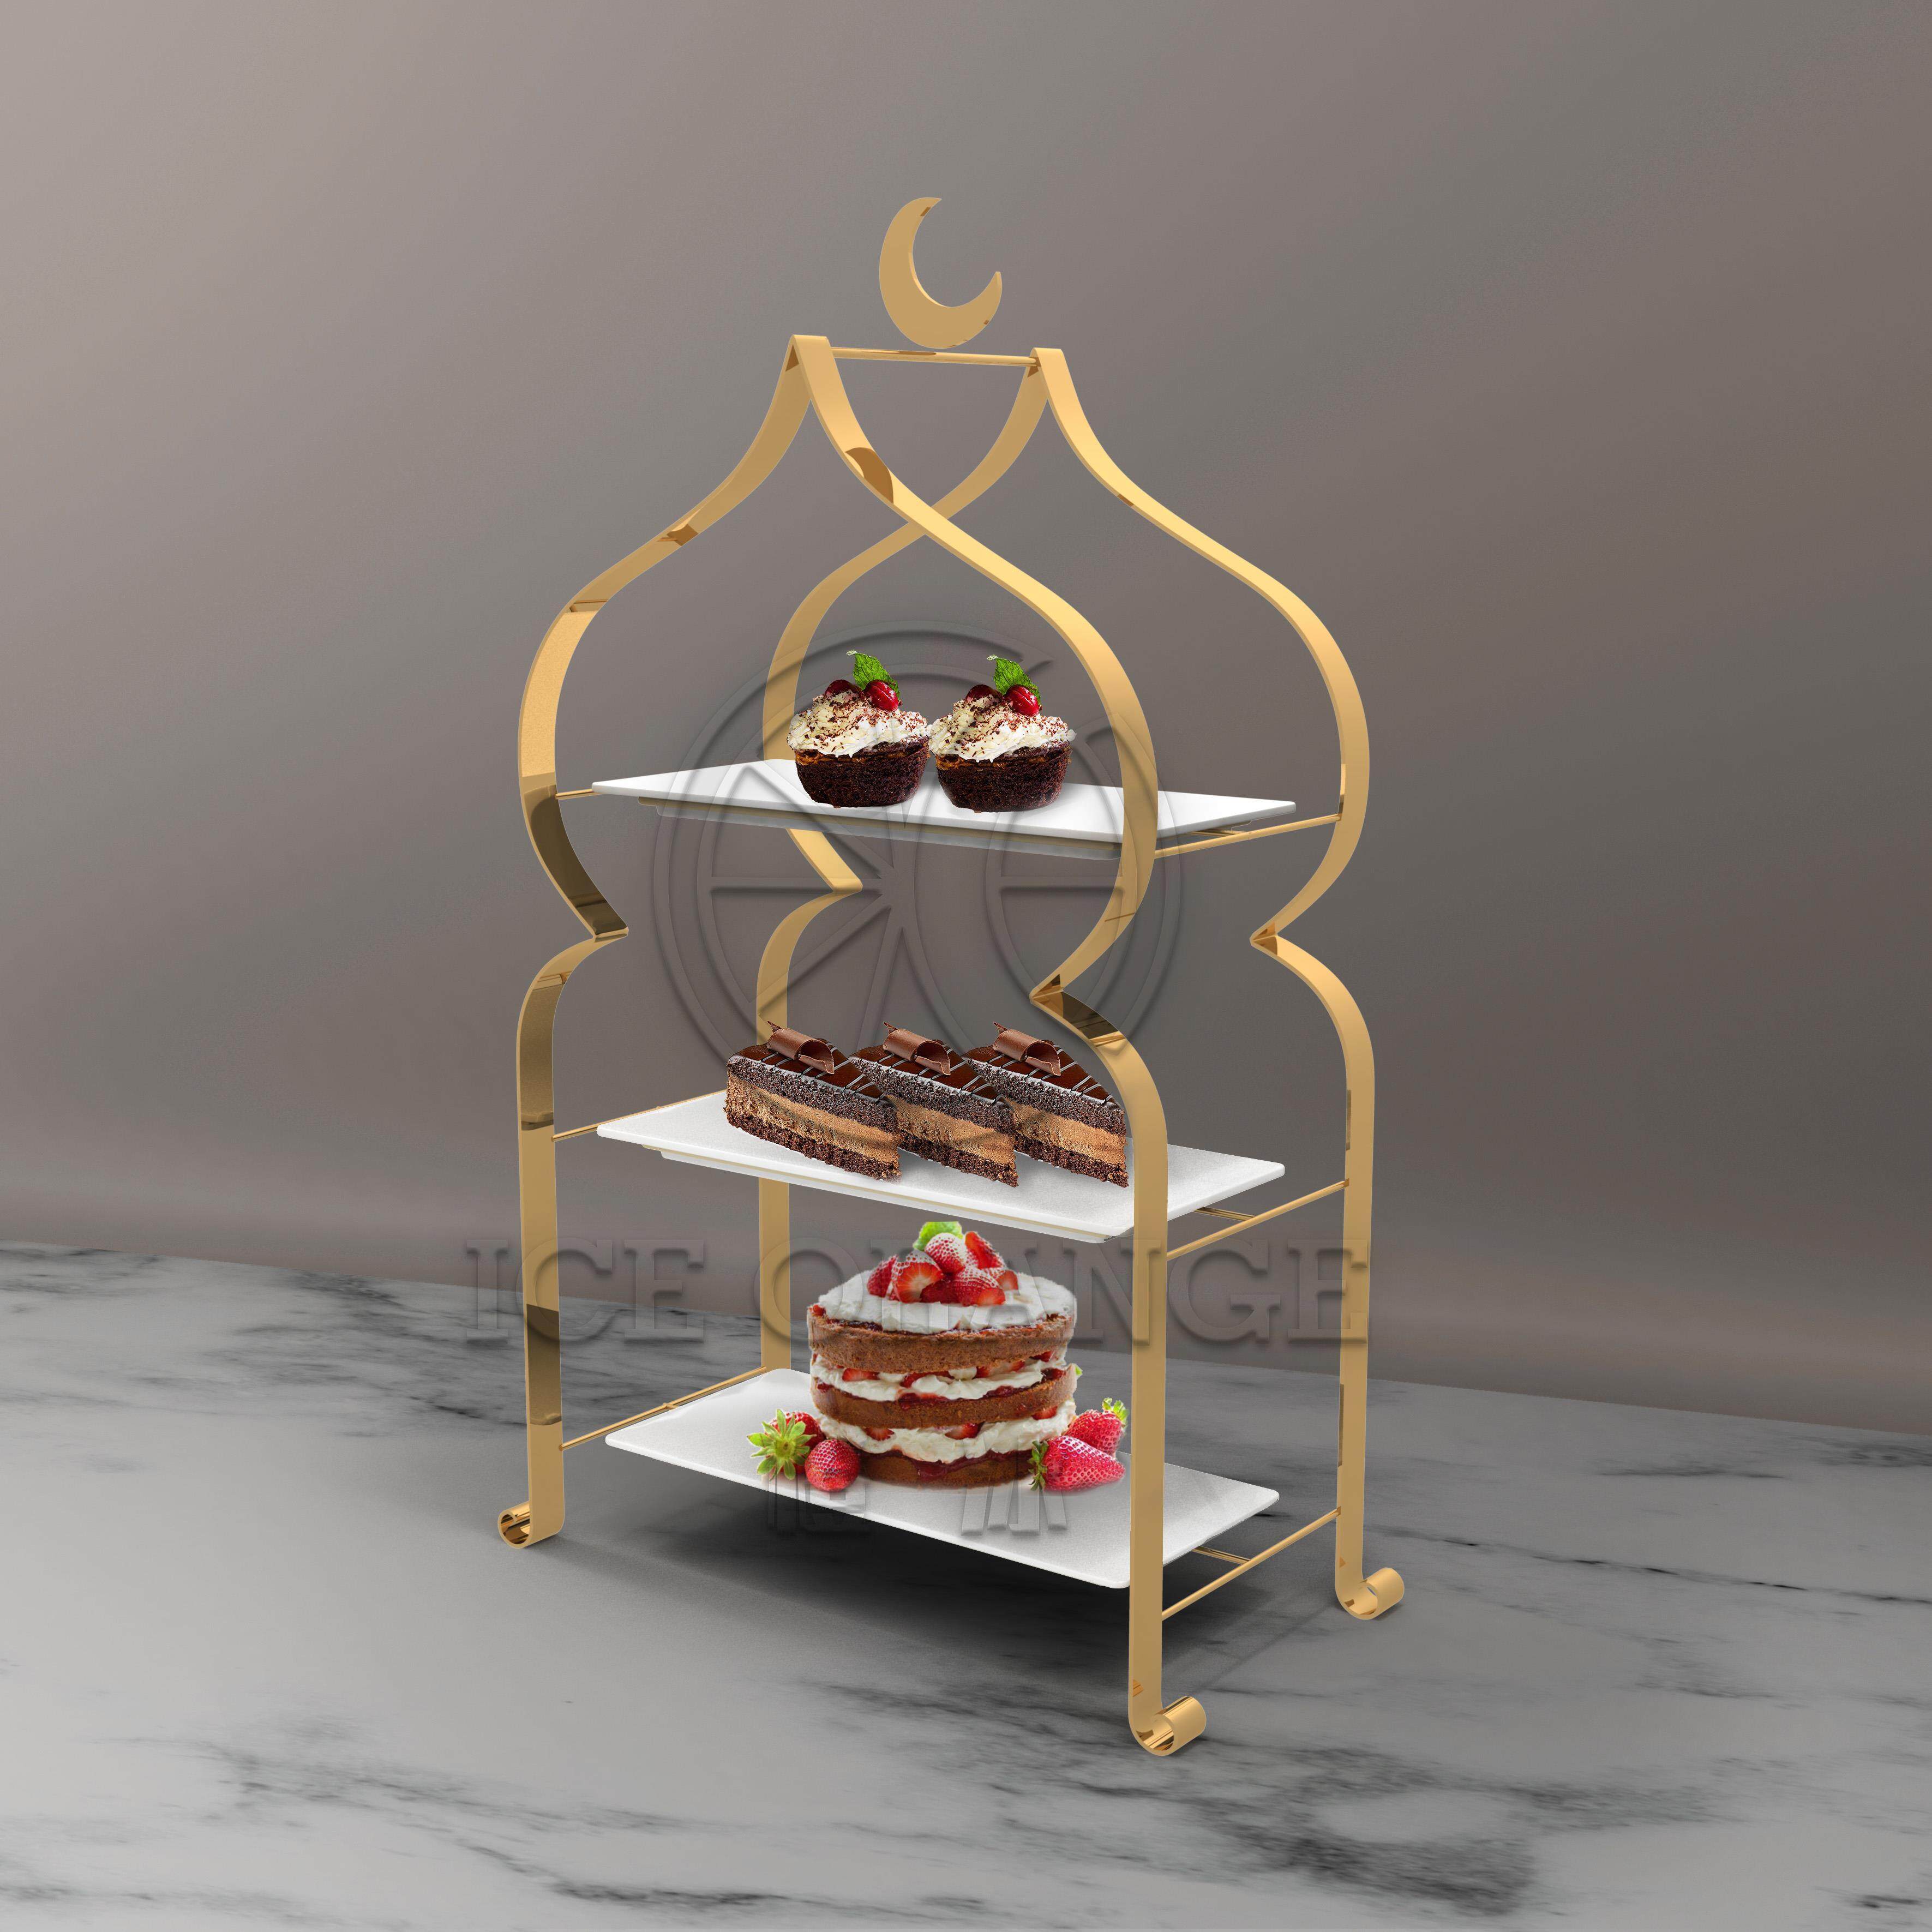 Eid Decoration 3 Tiers Cake Stand